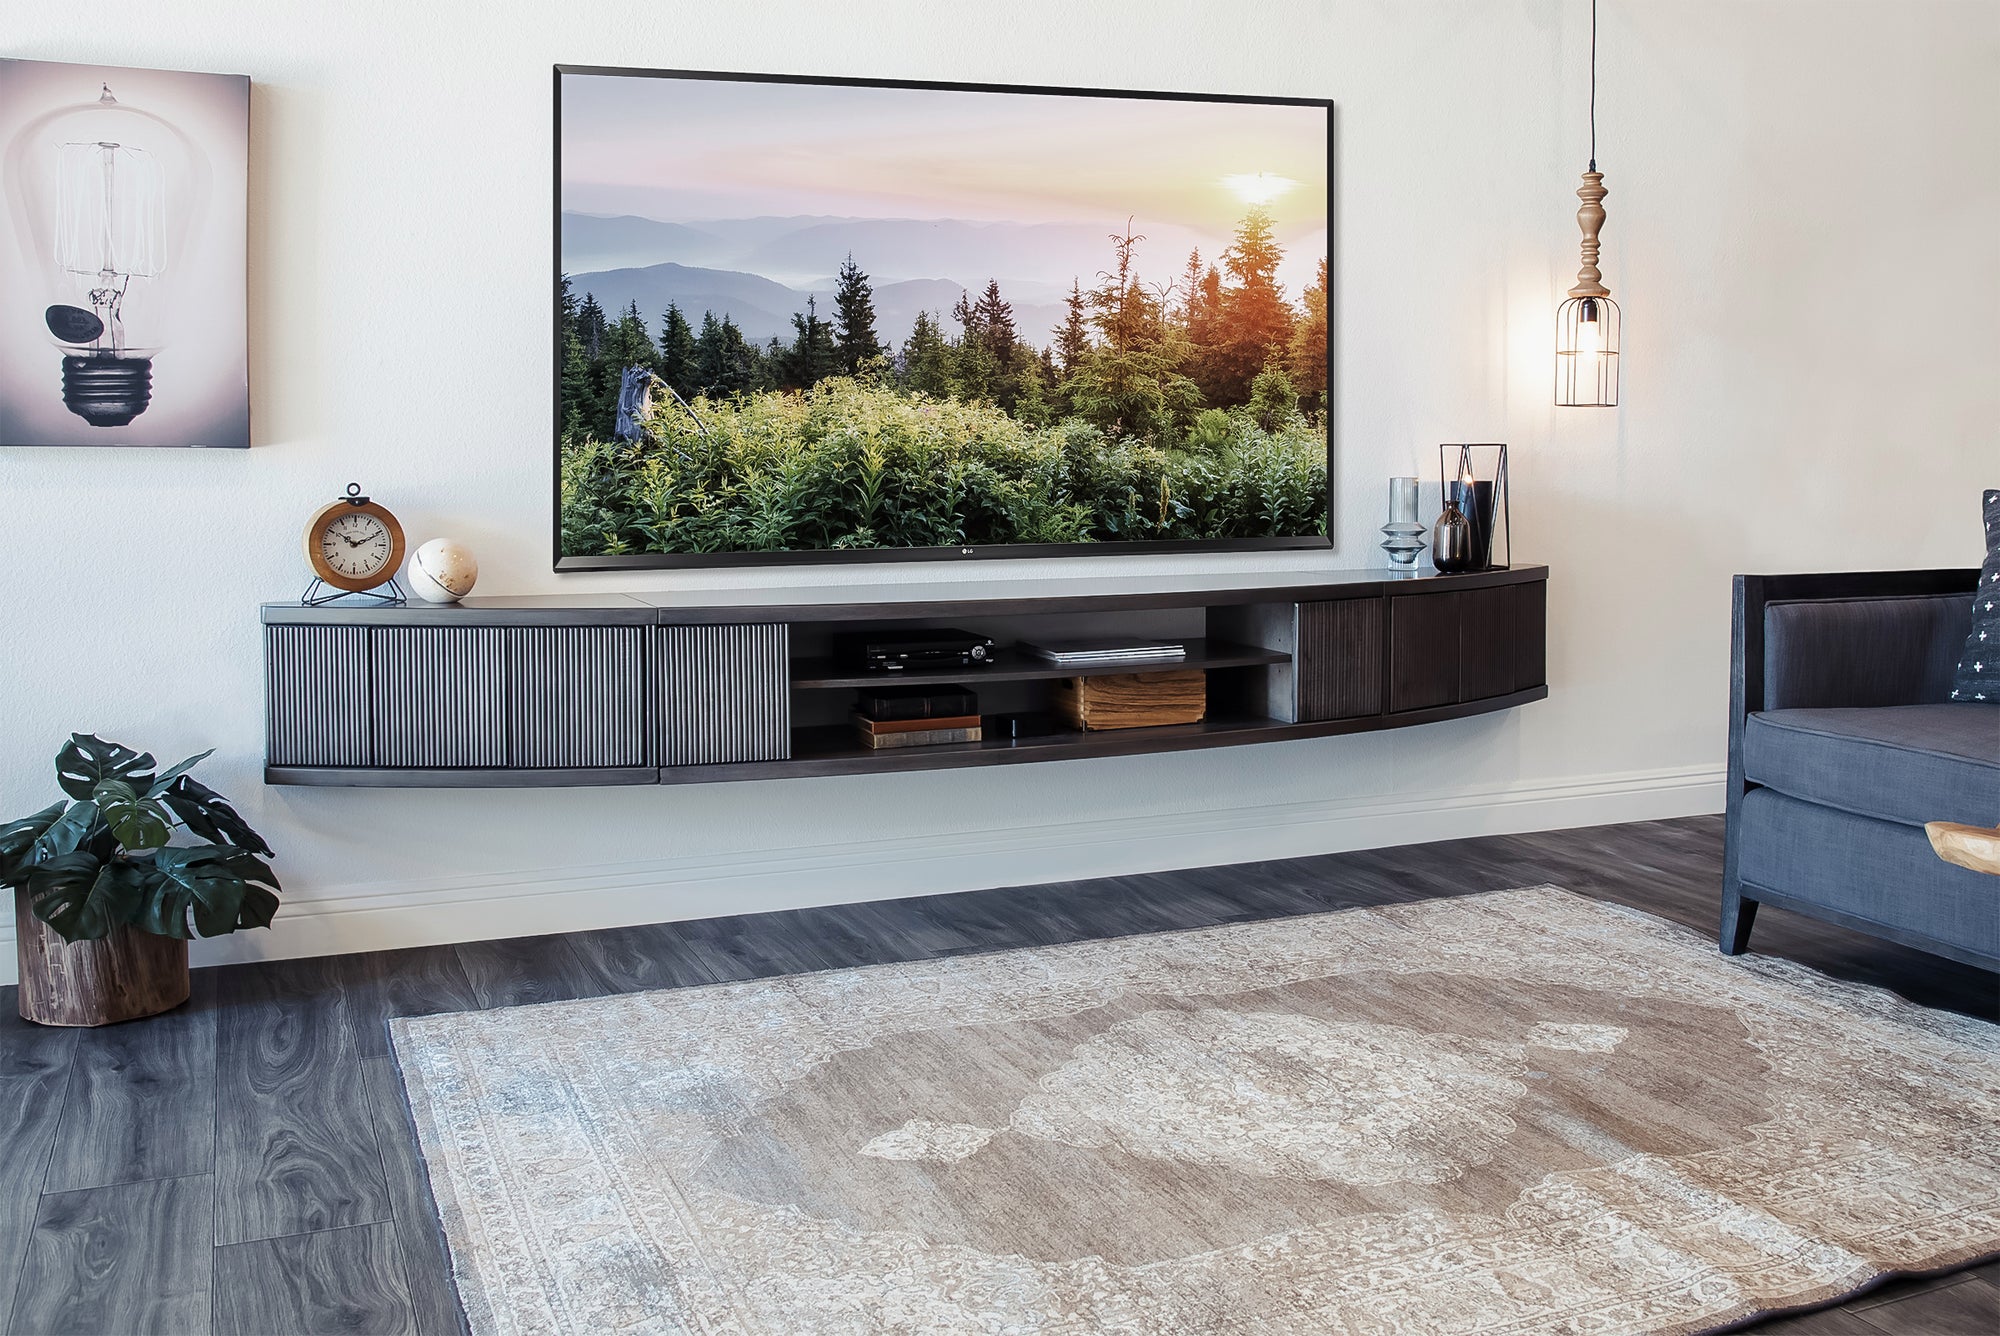 Should You Get a TV Stand or a Wall Mount?